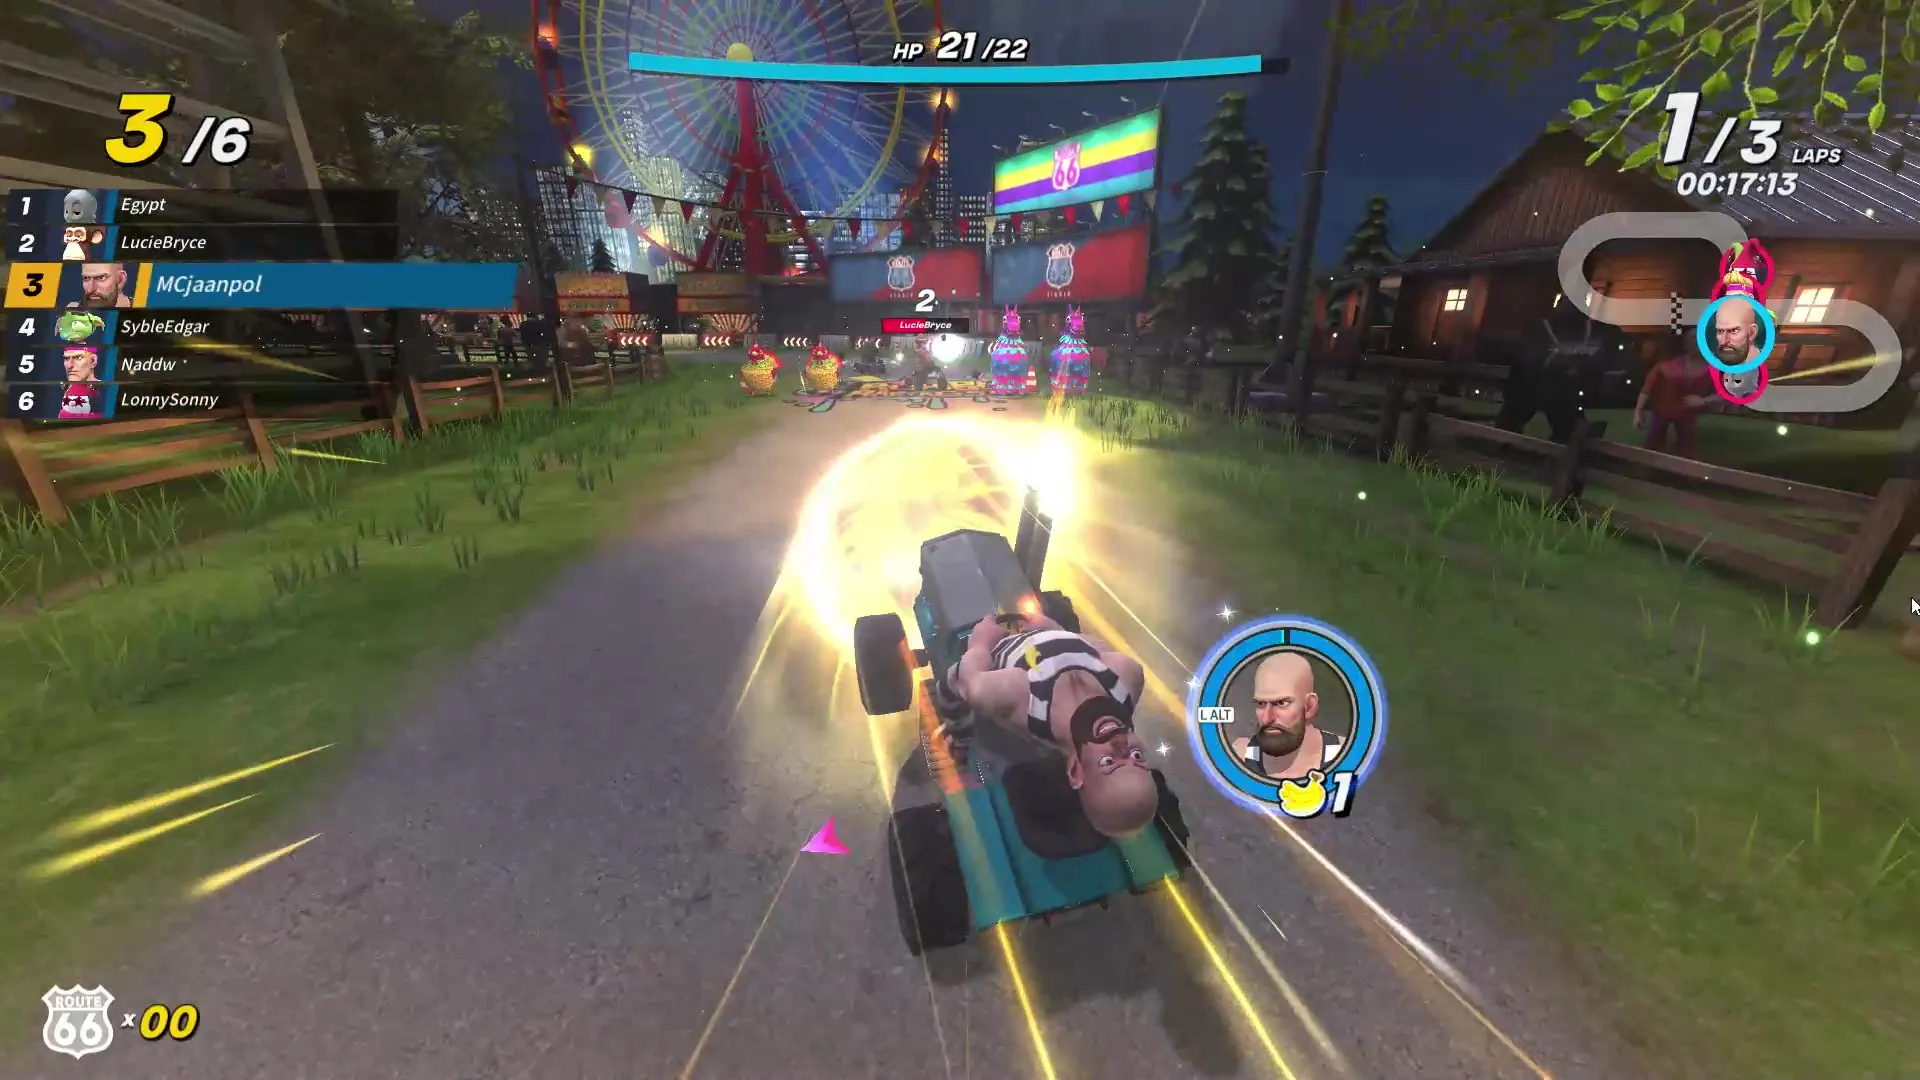 Rumble Racing Star gameplay: activate full speed boost